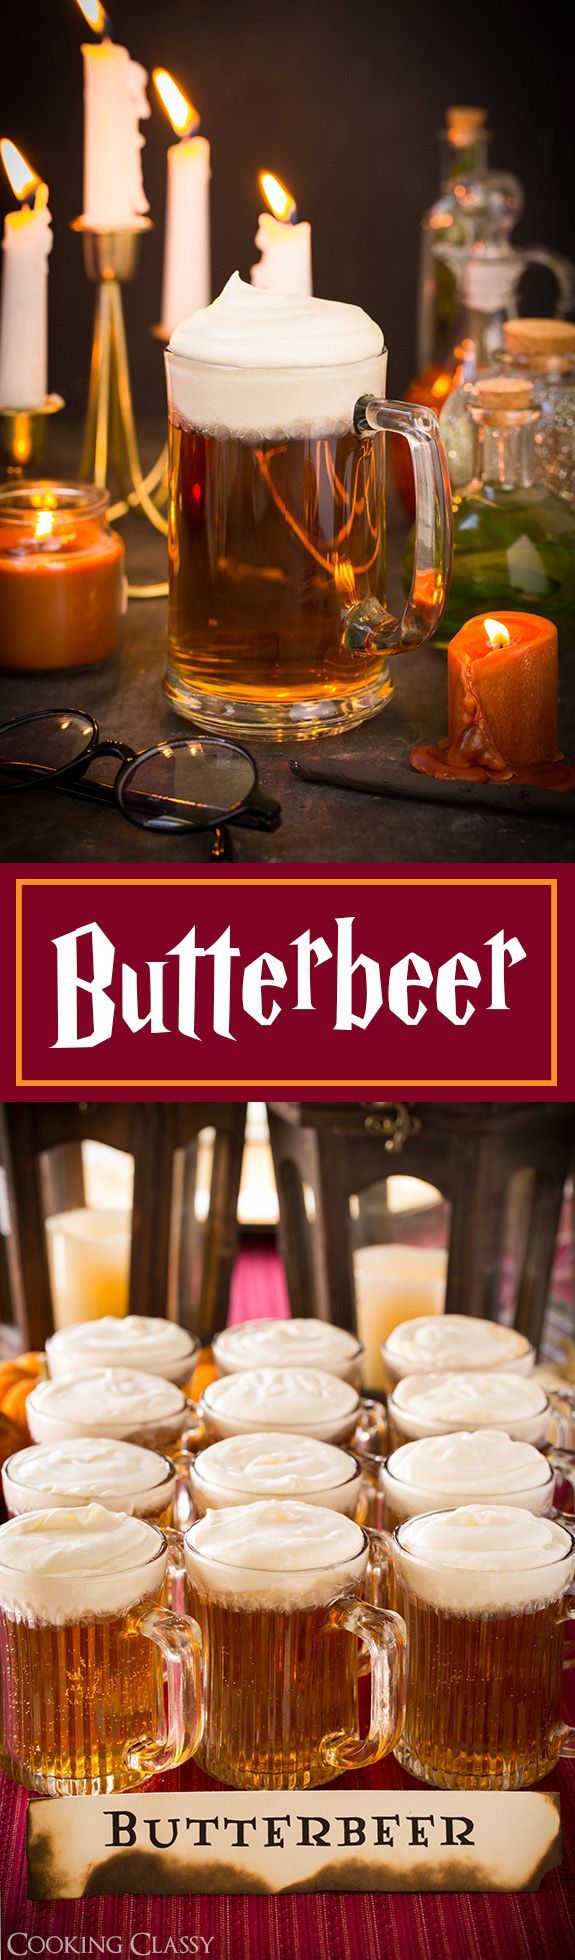 Butterbeer Recipe and a Harry Potter Party – only 5 ingredients and so easy to make! Not so rich, sweet and heavy like some